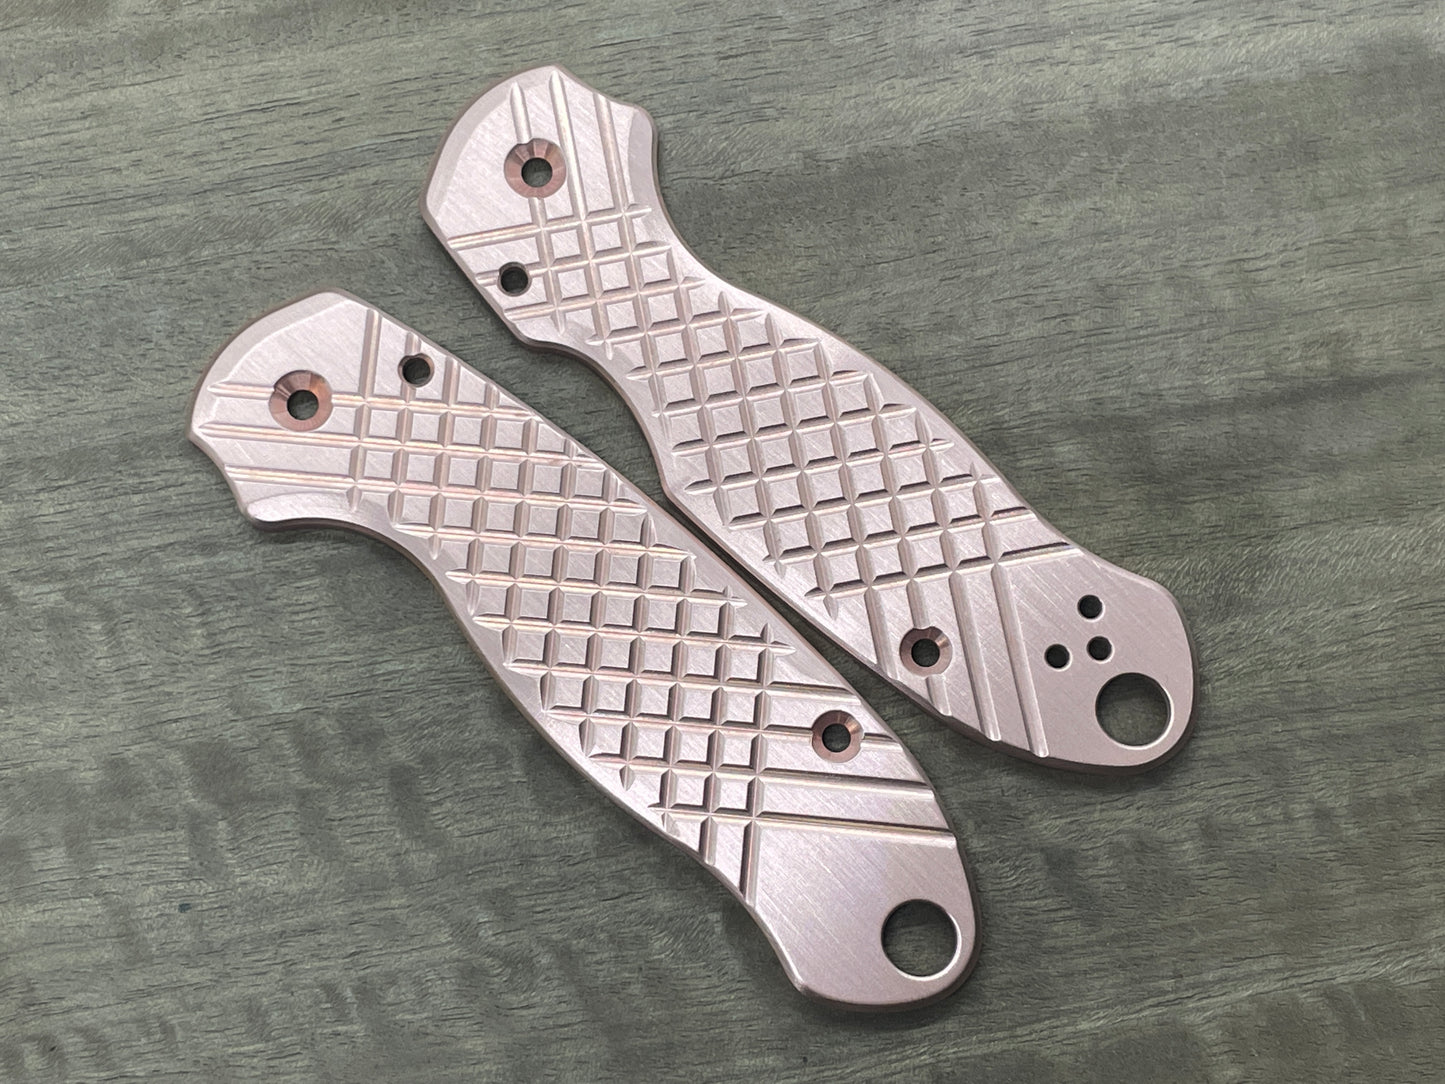 FRAG Cnc milled BRUSHED Copper Scales for Spyderco Para 3